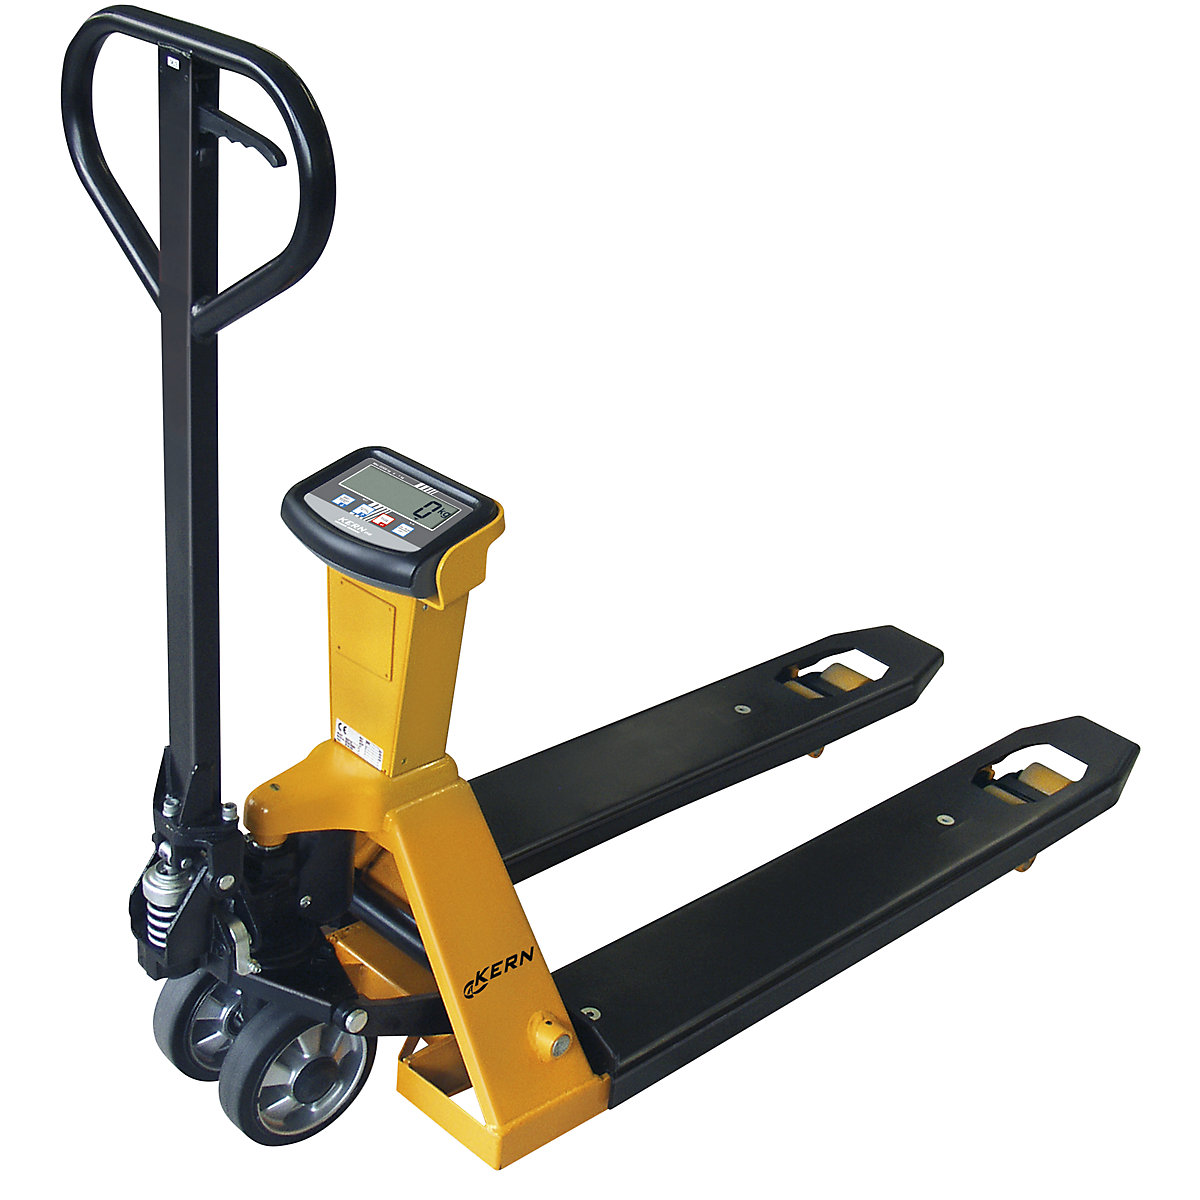 Pallet truck with LCD display - KERN